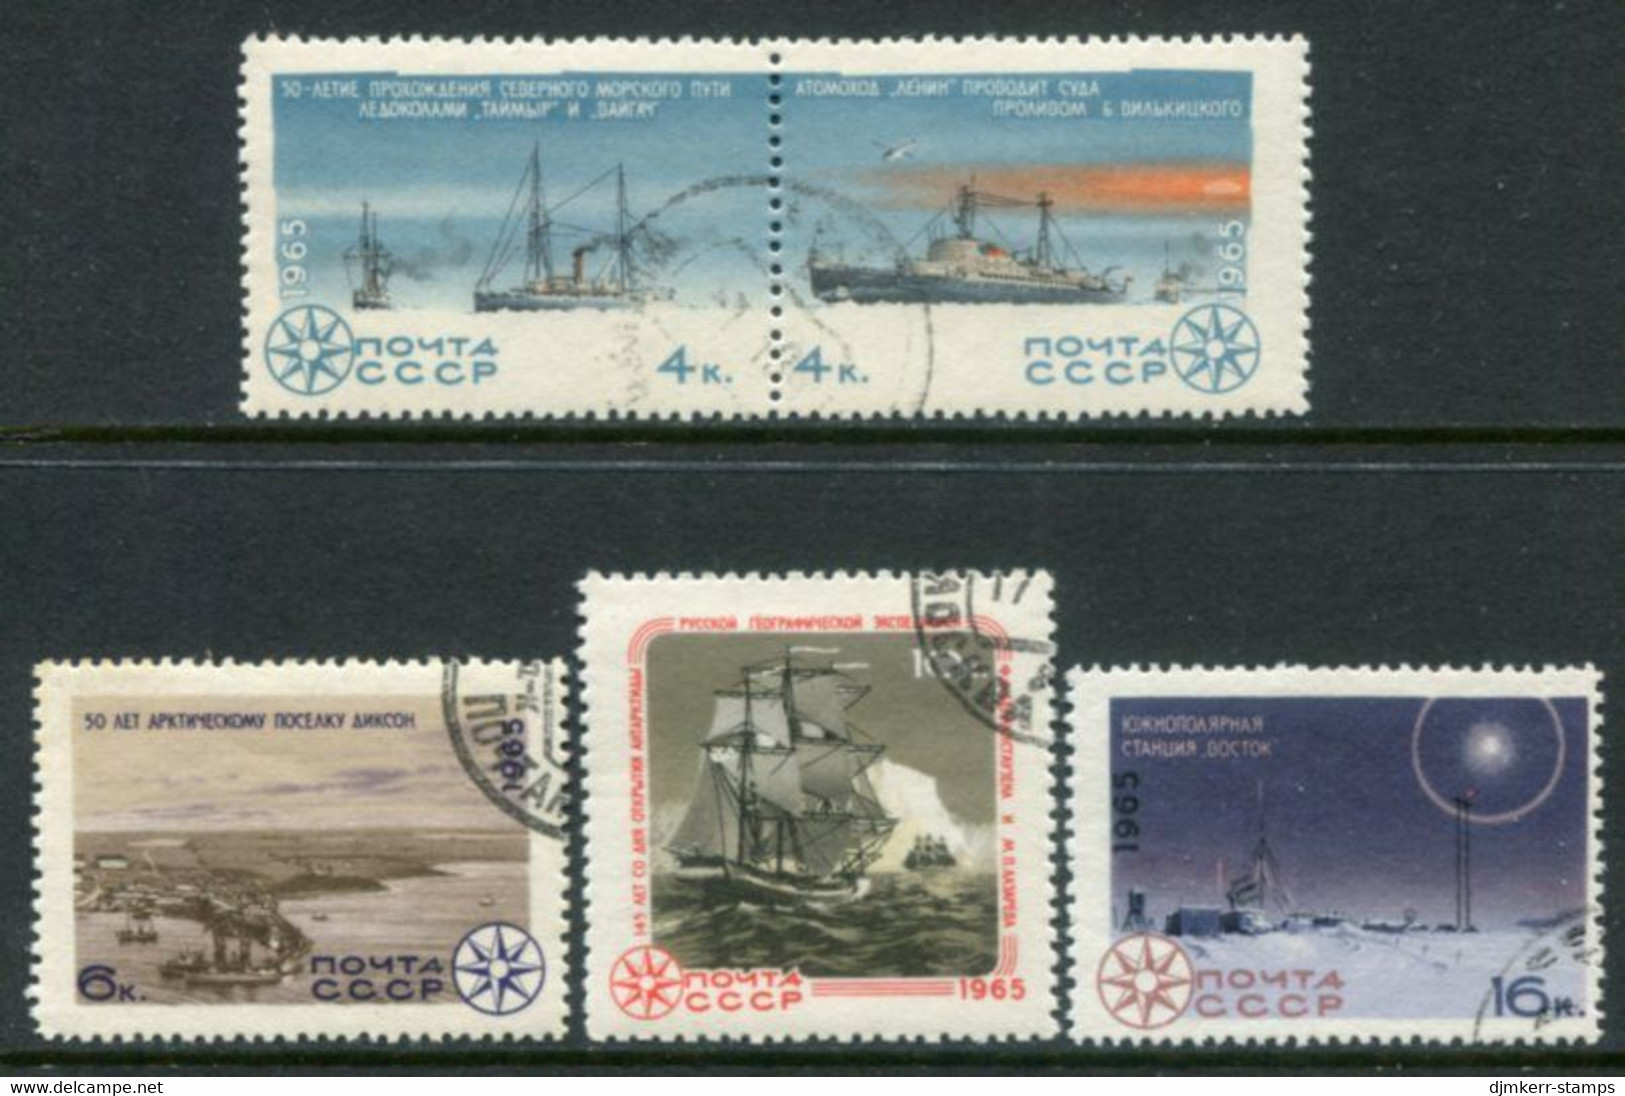 SOVIET UNION 1965 Polar Research Used  Michel 3125-29 - Used Stamps